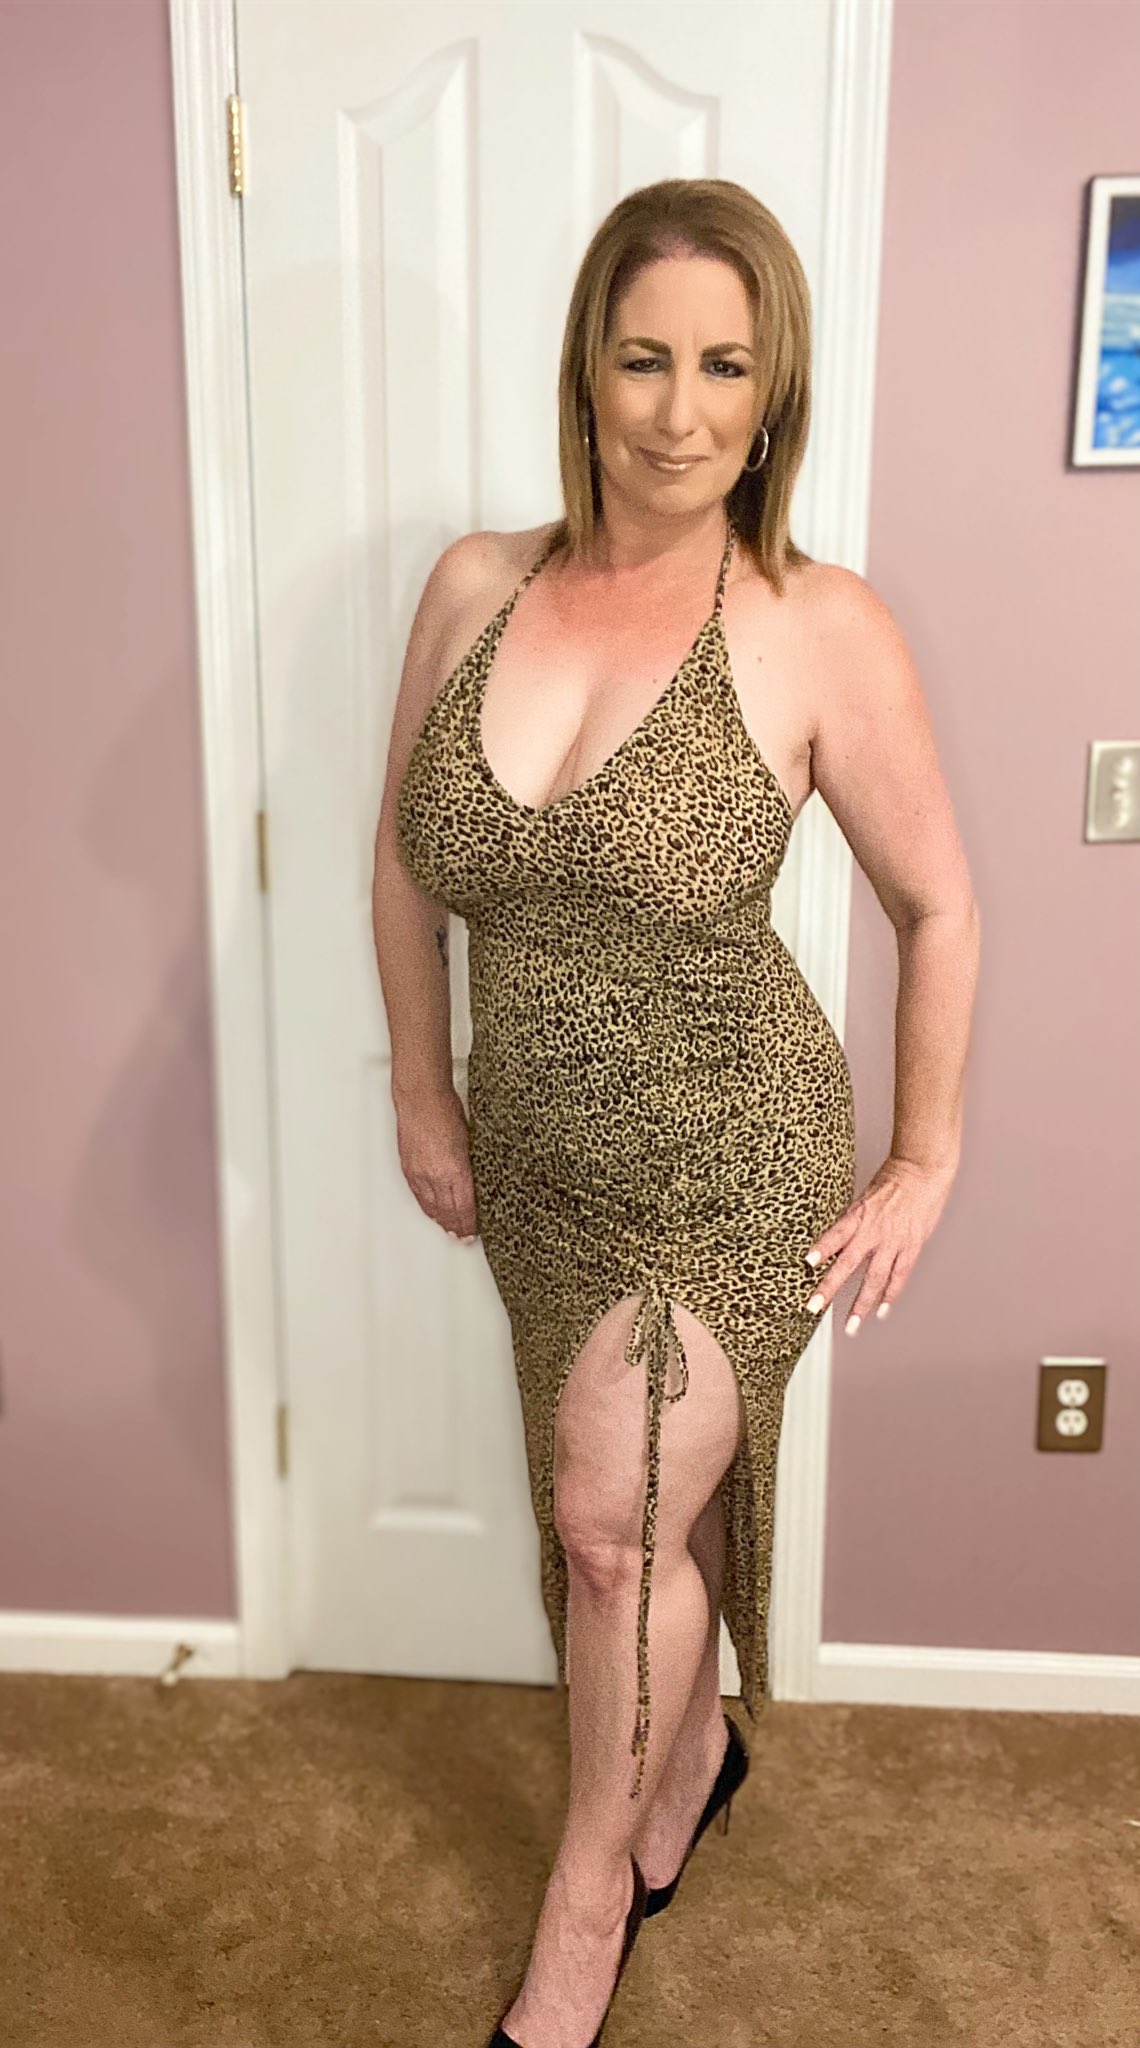 🌸⎛⎛💕⎞ 50 Y/O Horny Widow Older Woman 💕⎛⎛💕Special Rate****⎛⎛💥⎛⎛💘